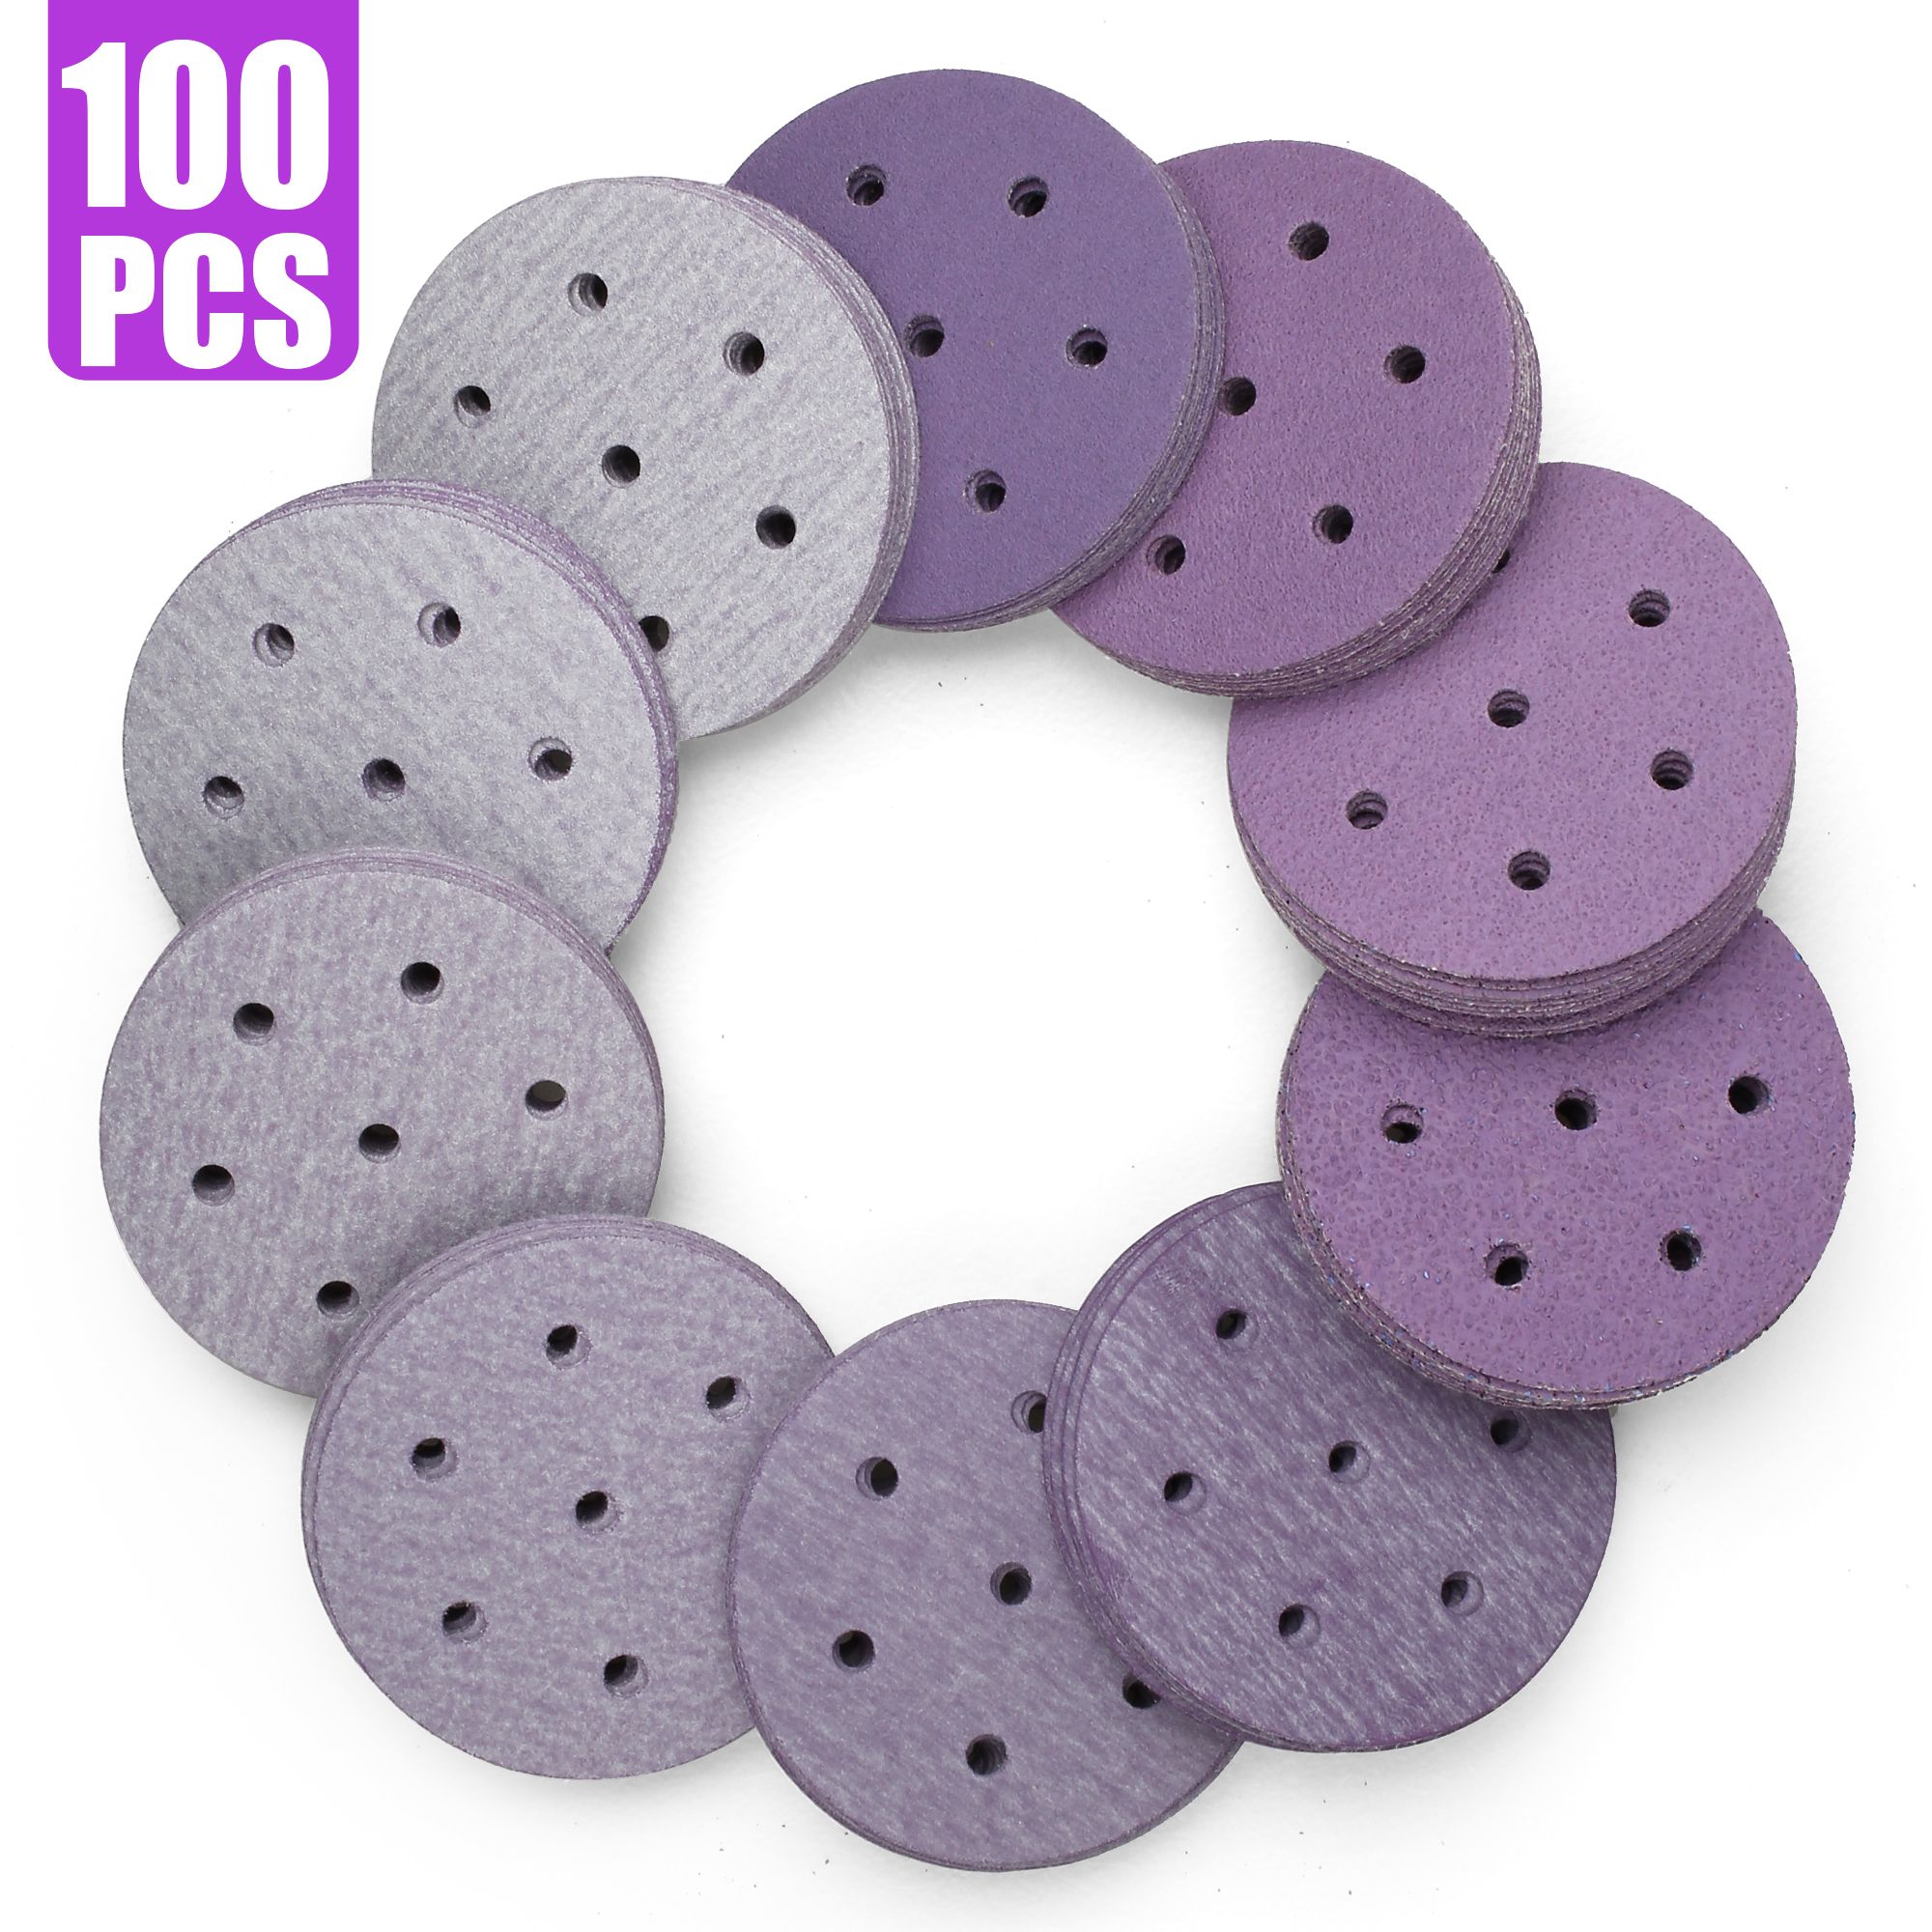 5 Inch 8 Hole Hook and Loop Sanding Discs Sandpaper Orbital Sander Discs Include 60 80 100 120 150 180 240 320 400 600 and 800 Grit Gold Sand Sheets 110PCS